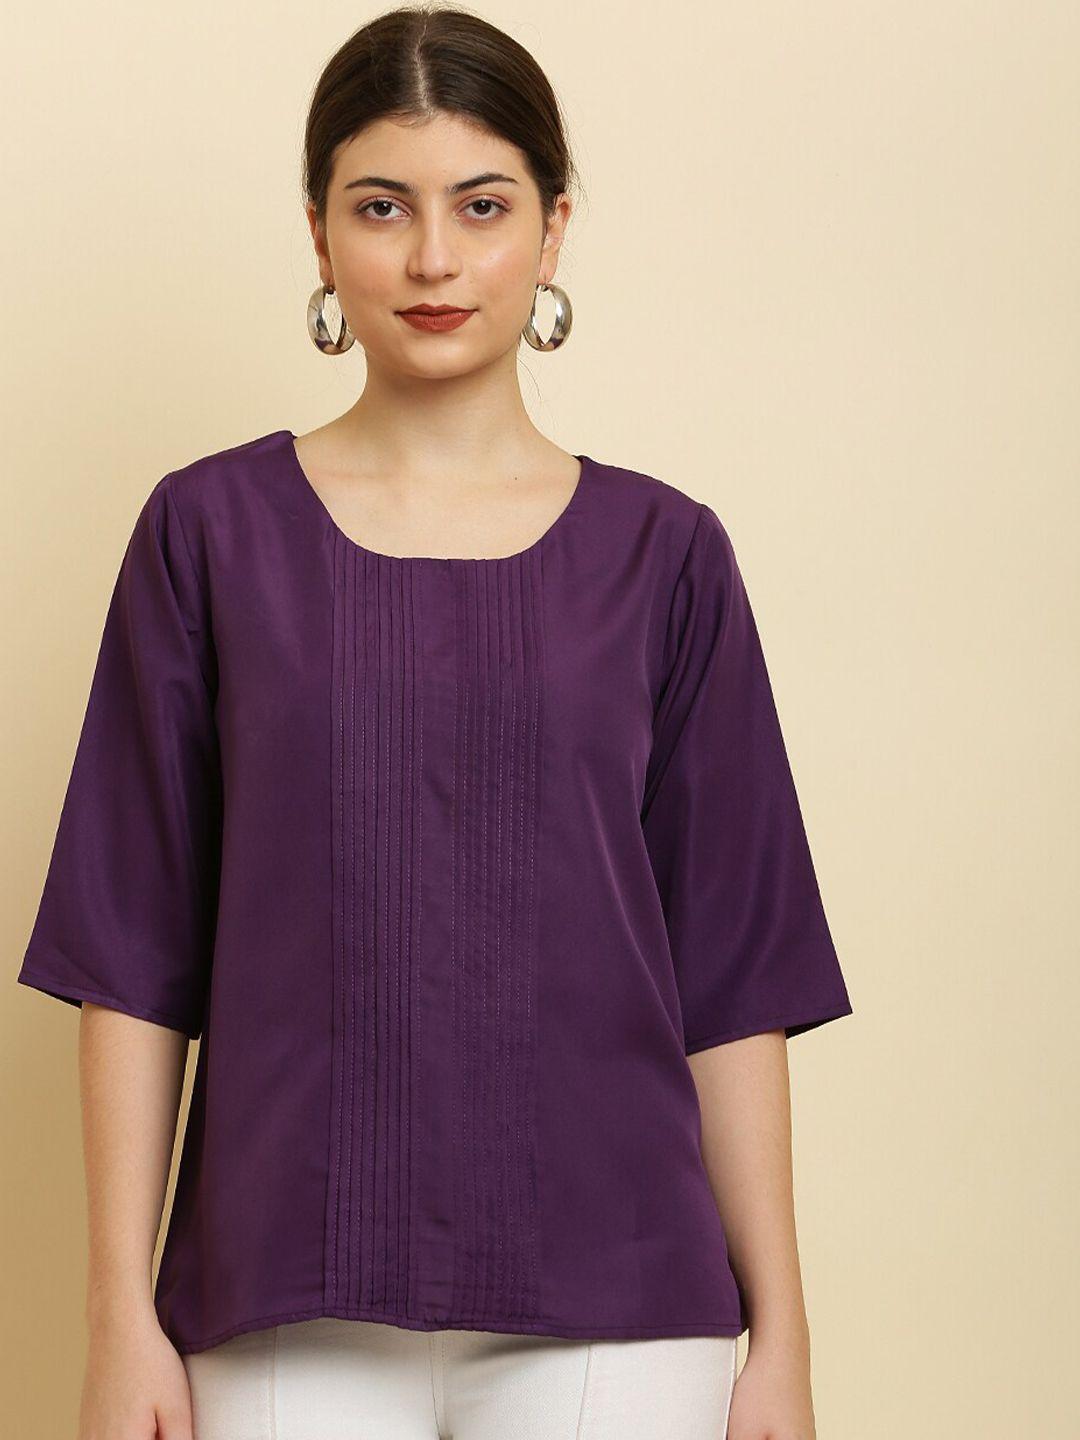 here&now violet round neck pin tucks top